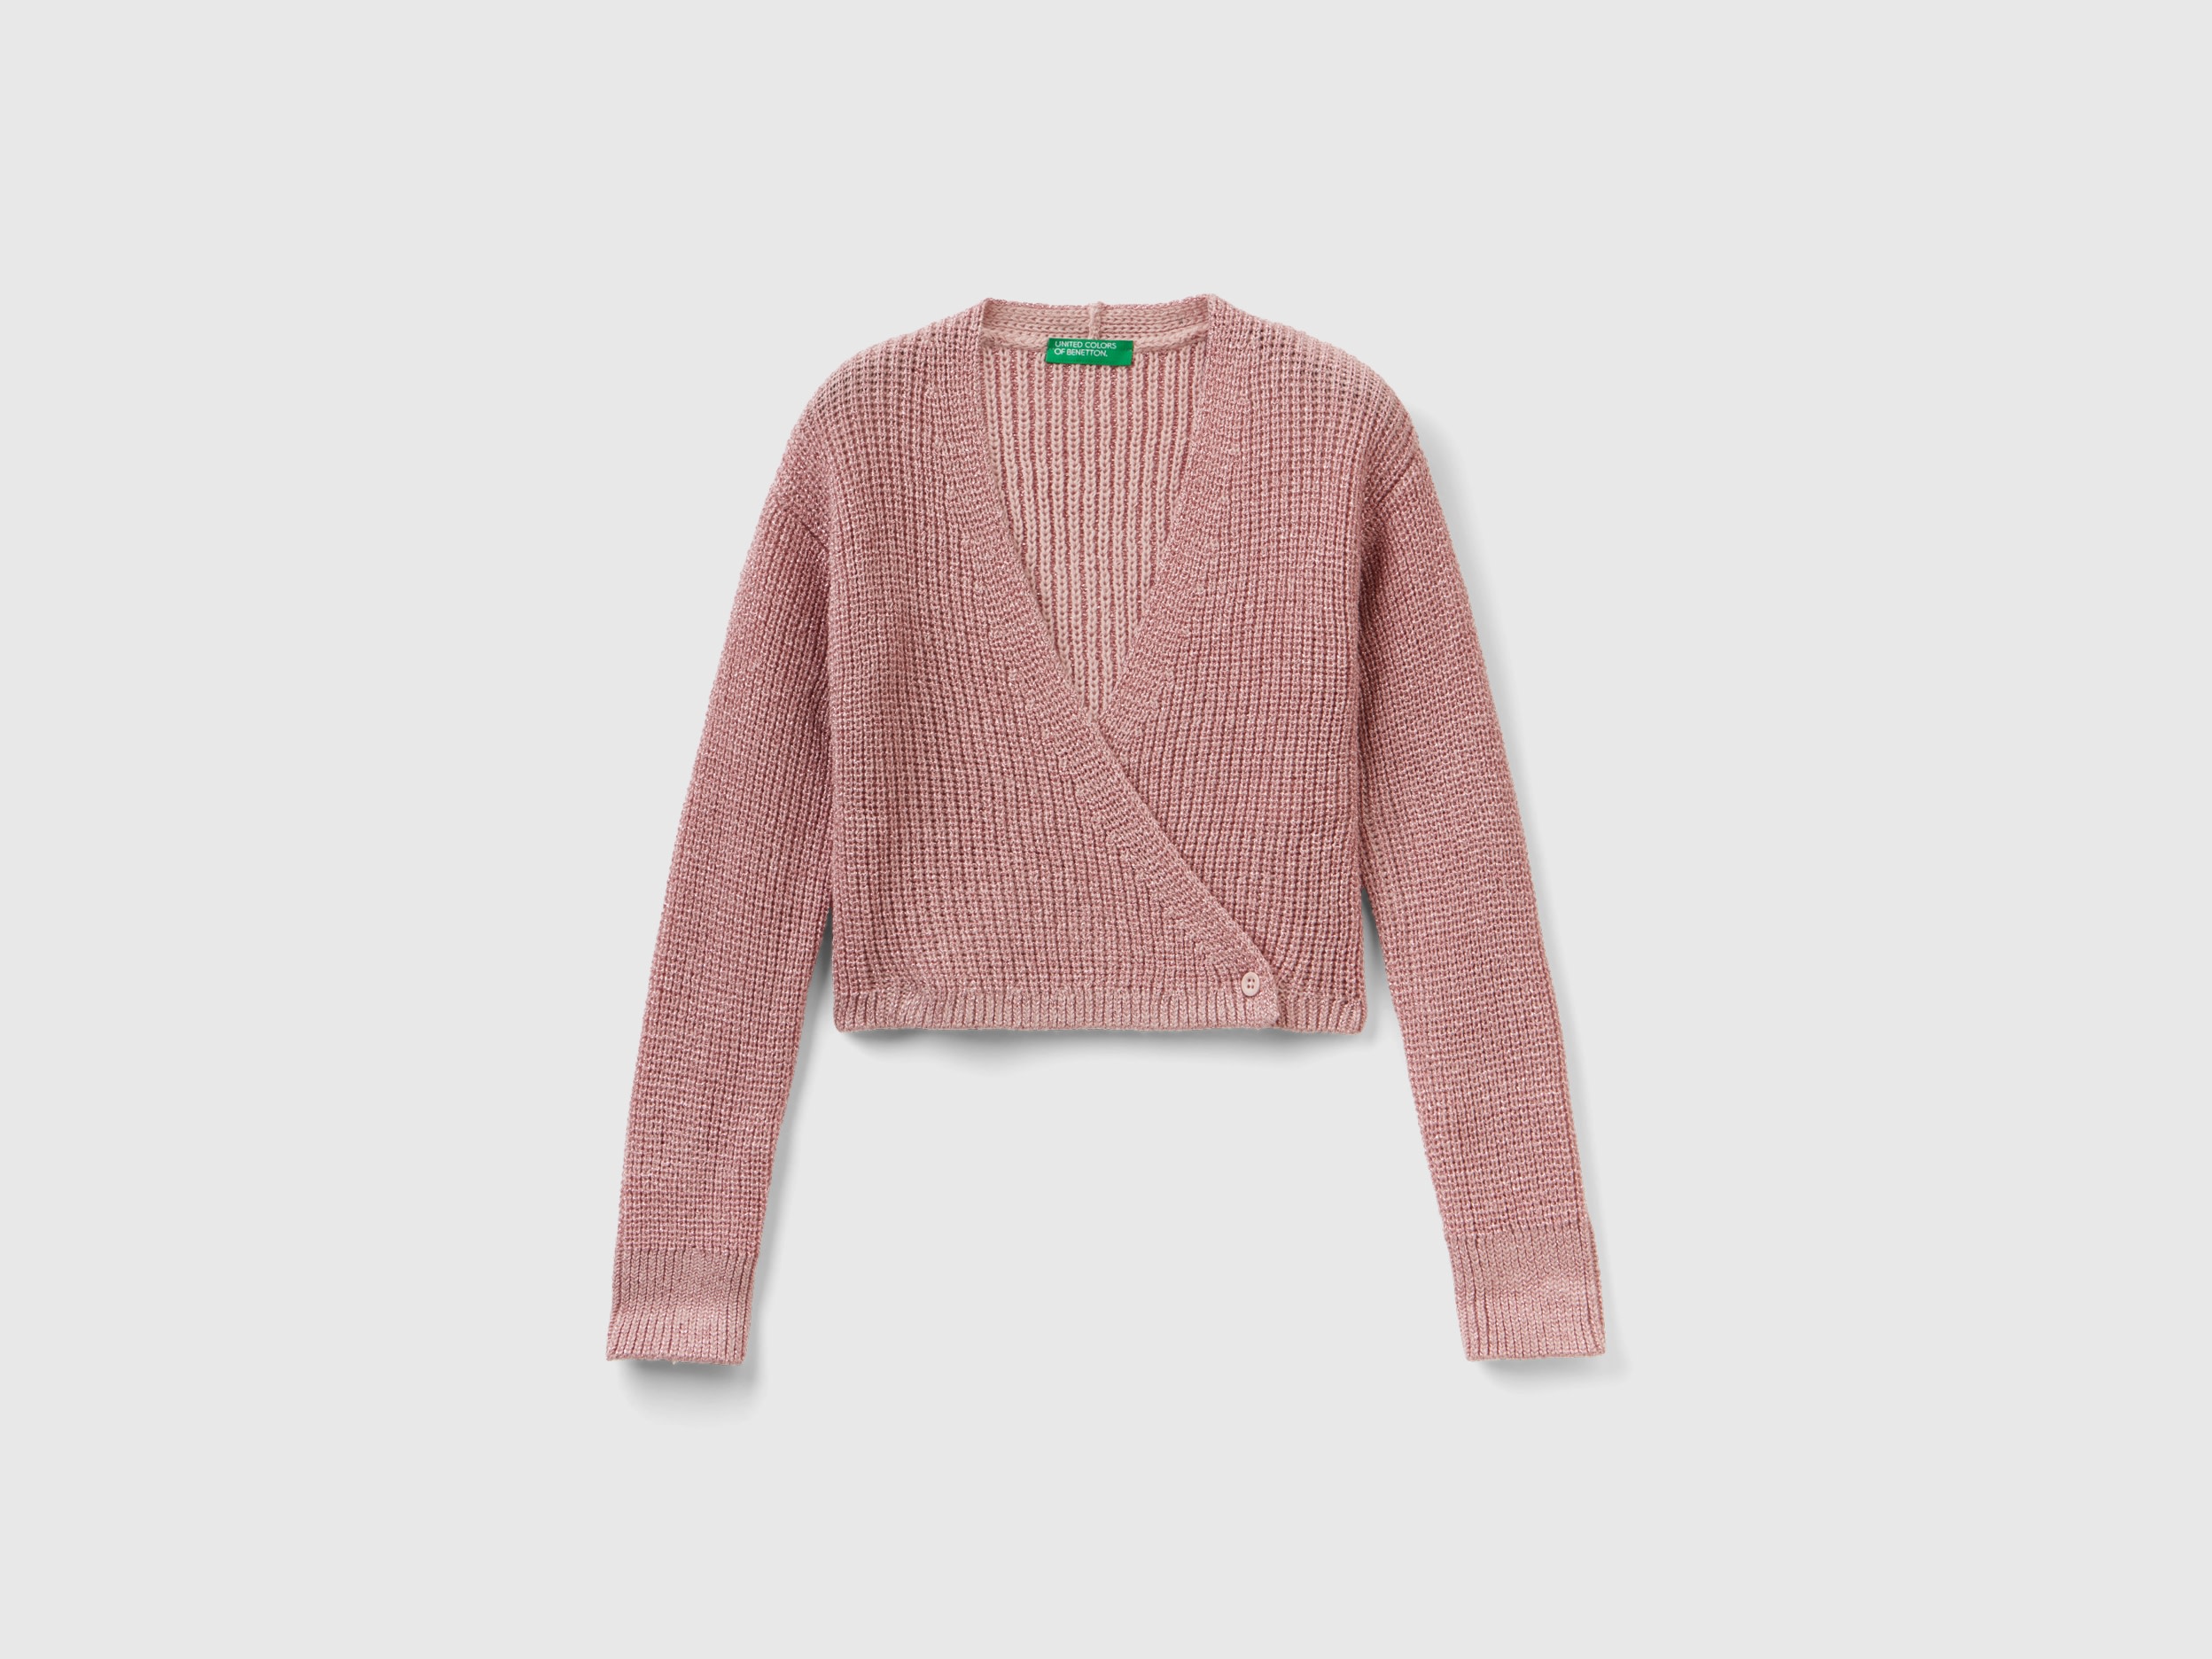 Benetton, Cropped Cardigan With Lurex, size S, Pink, Kids